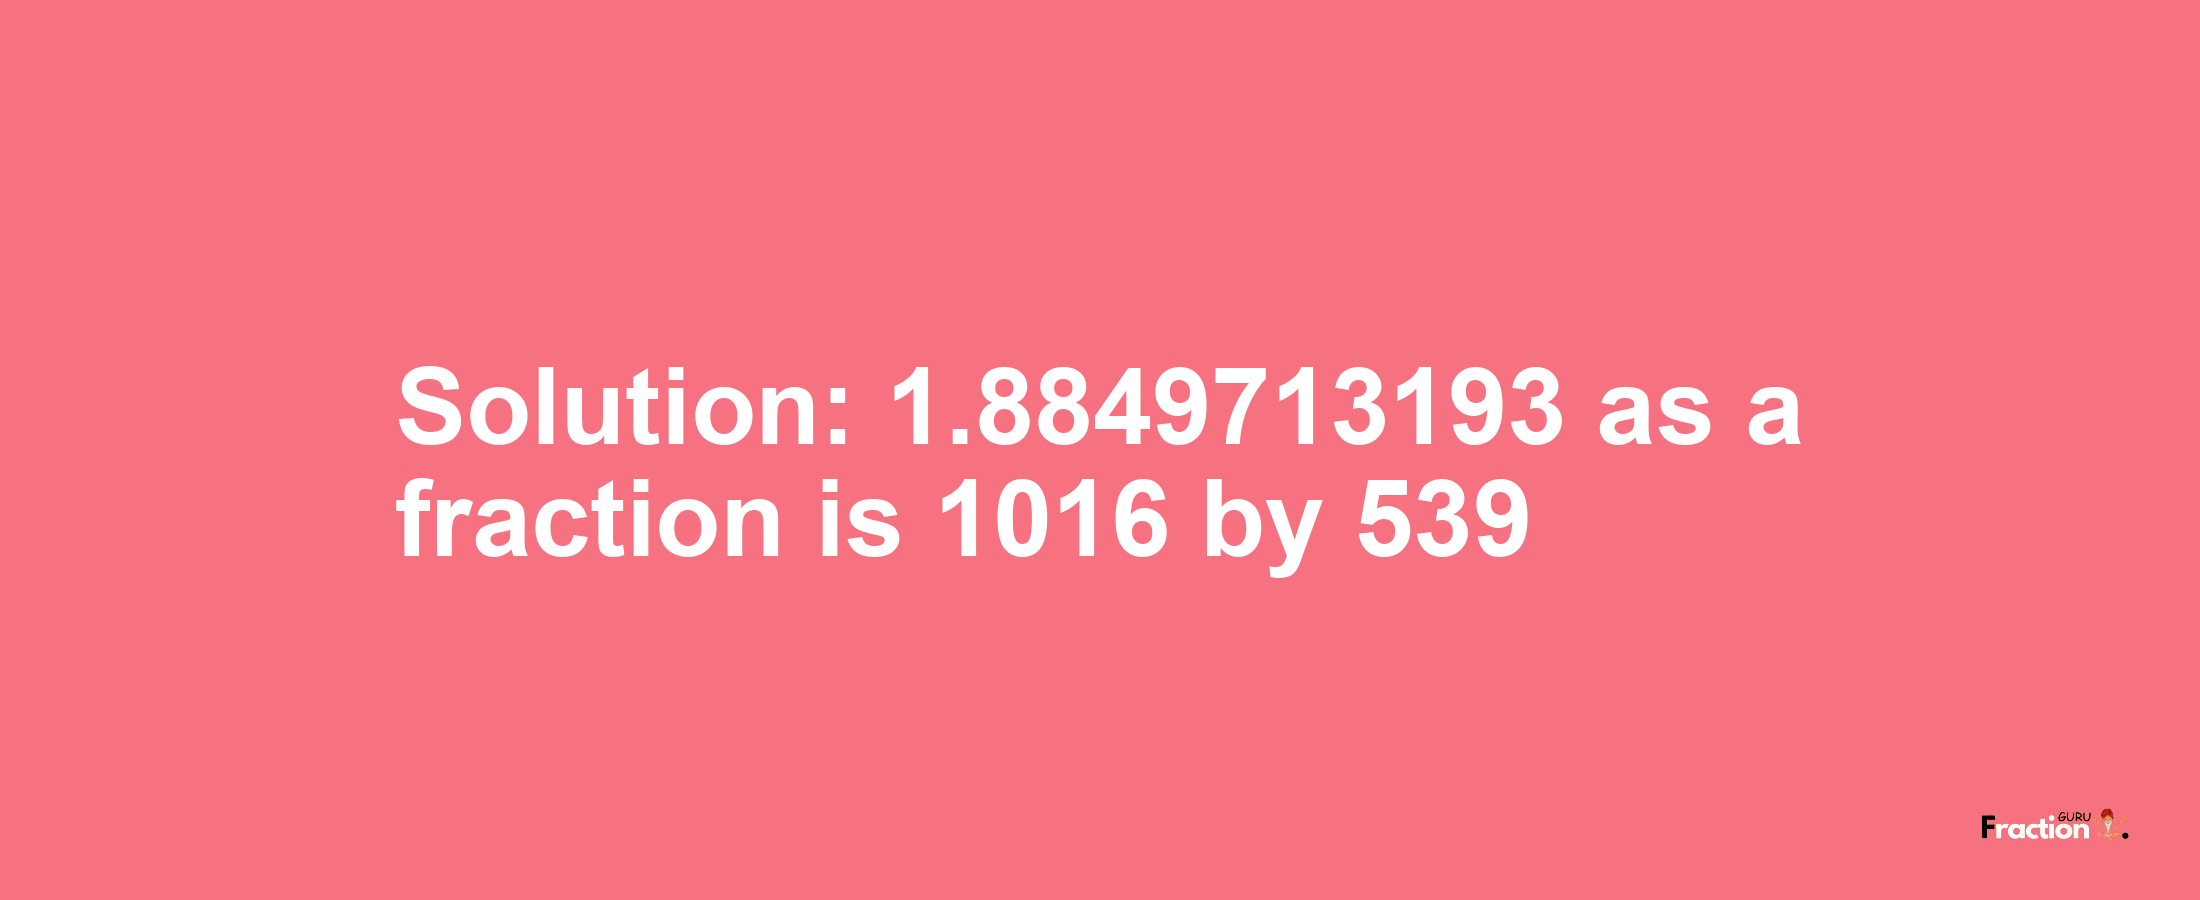 Solution:1.8849713193 as a fraction is 1016/539